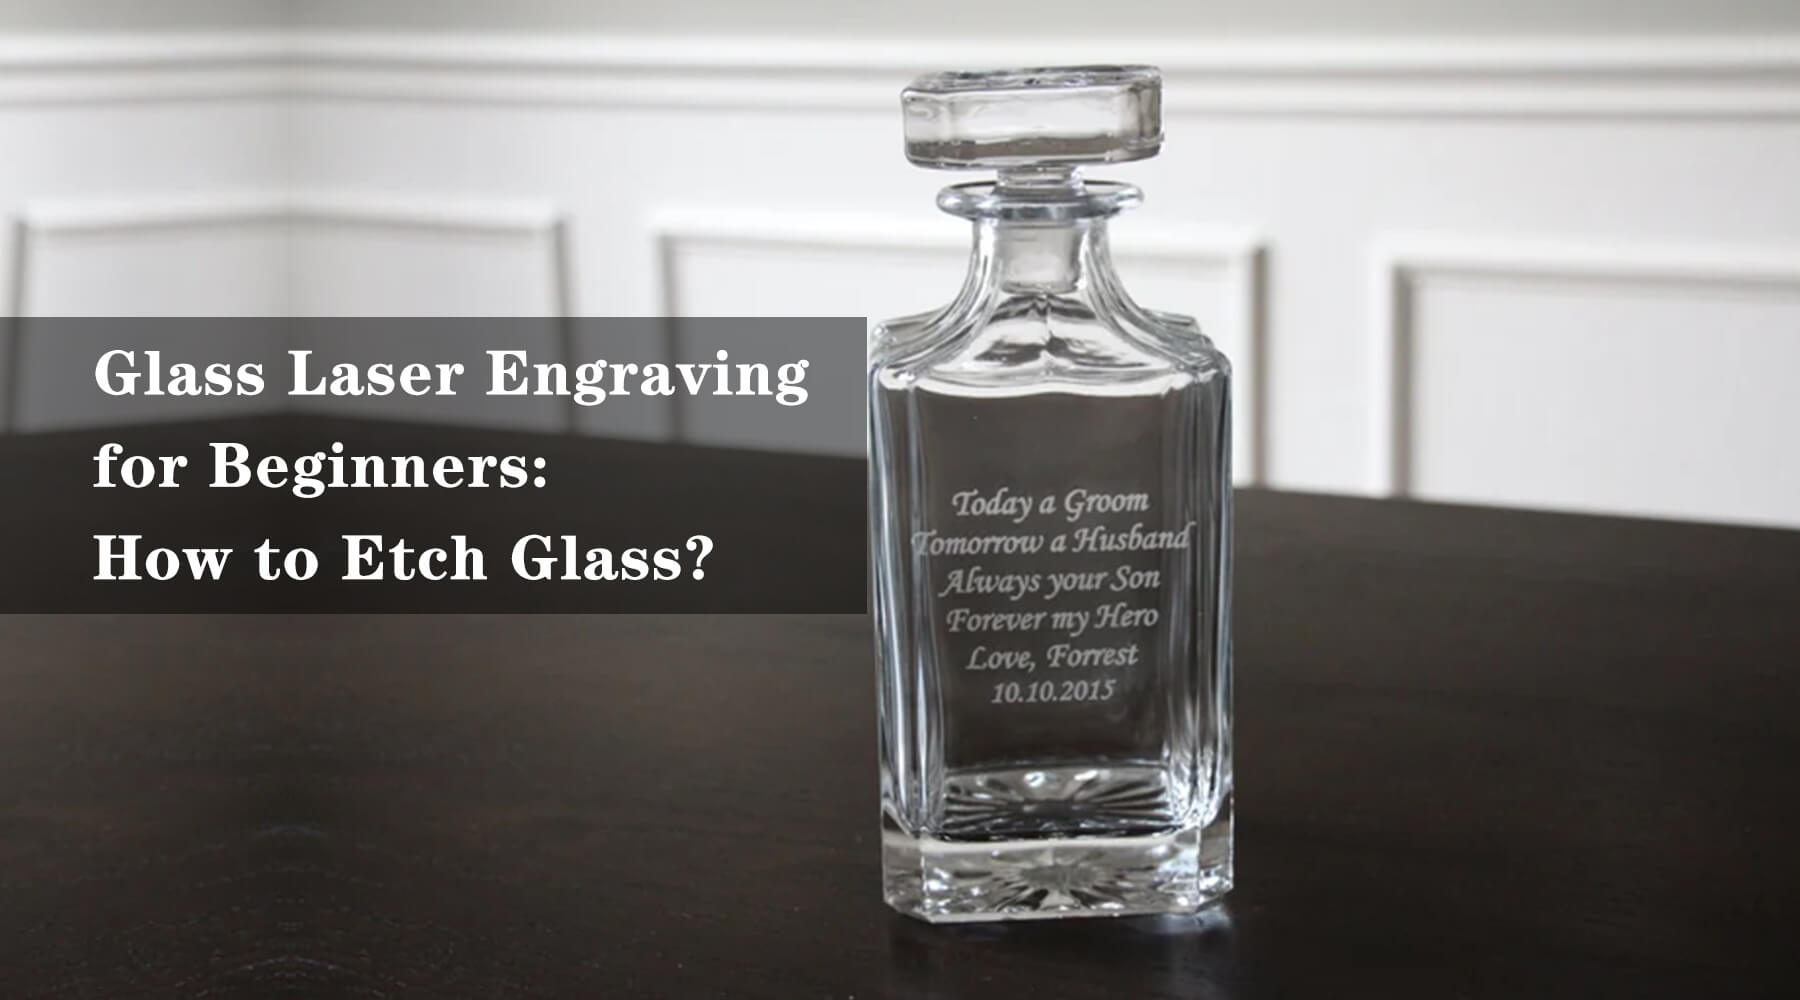 Glass engraving for beginners - Relief engraving - Part TWO (final) 